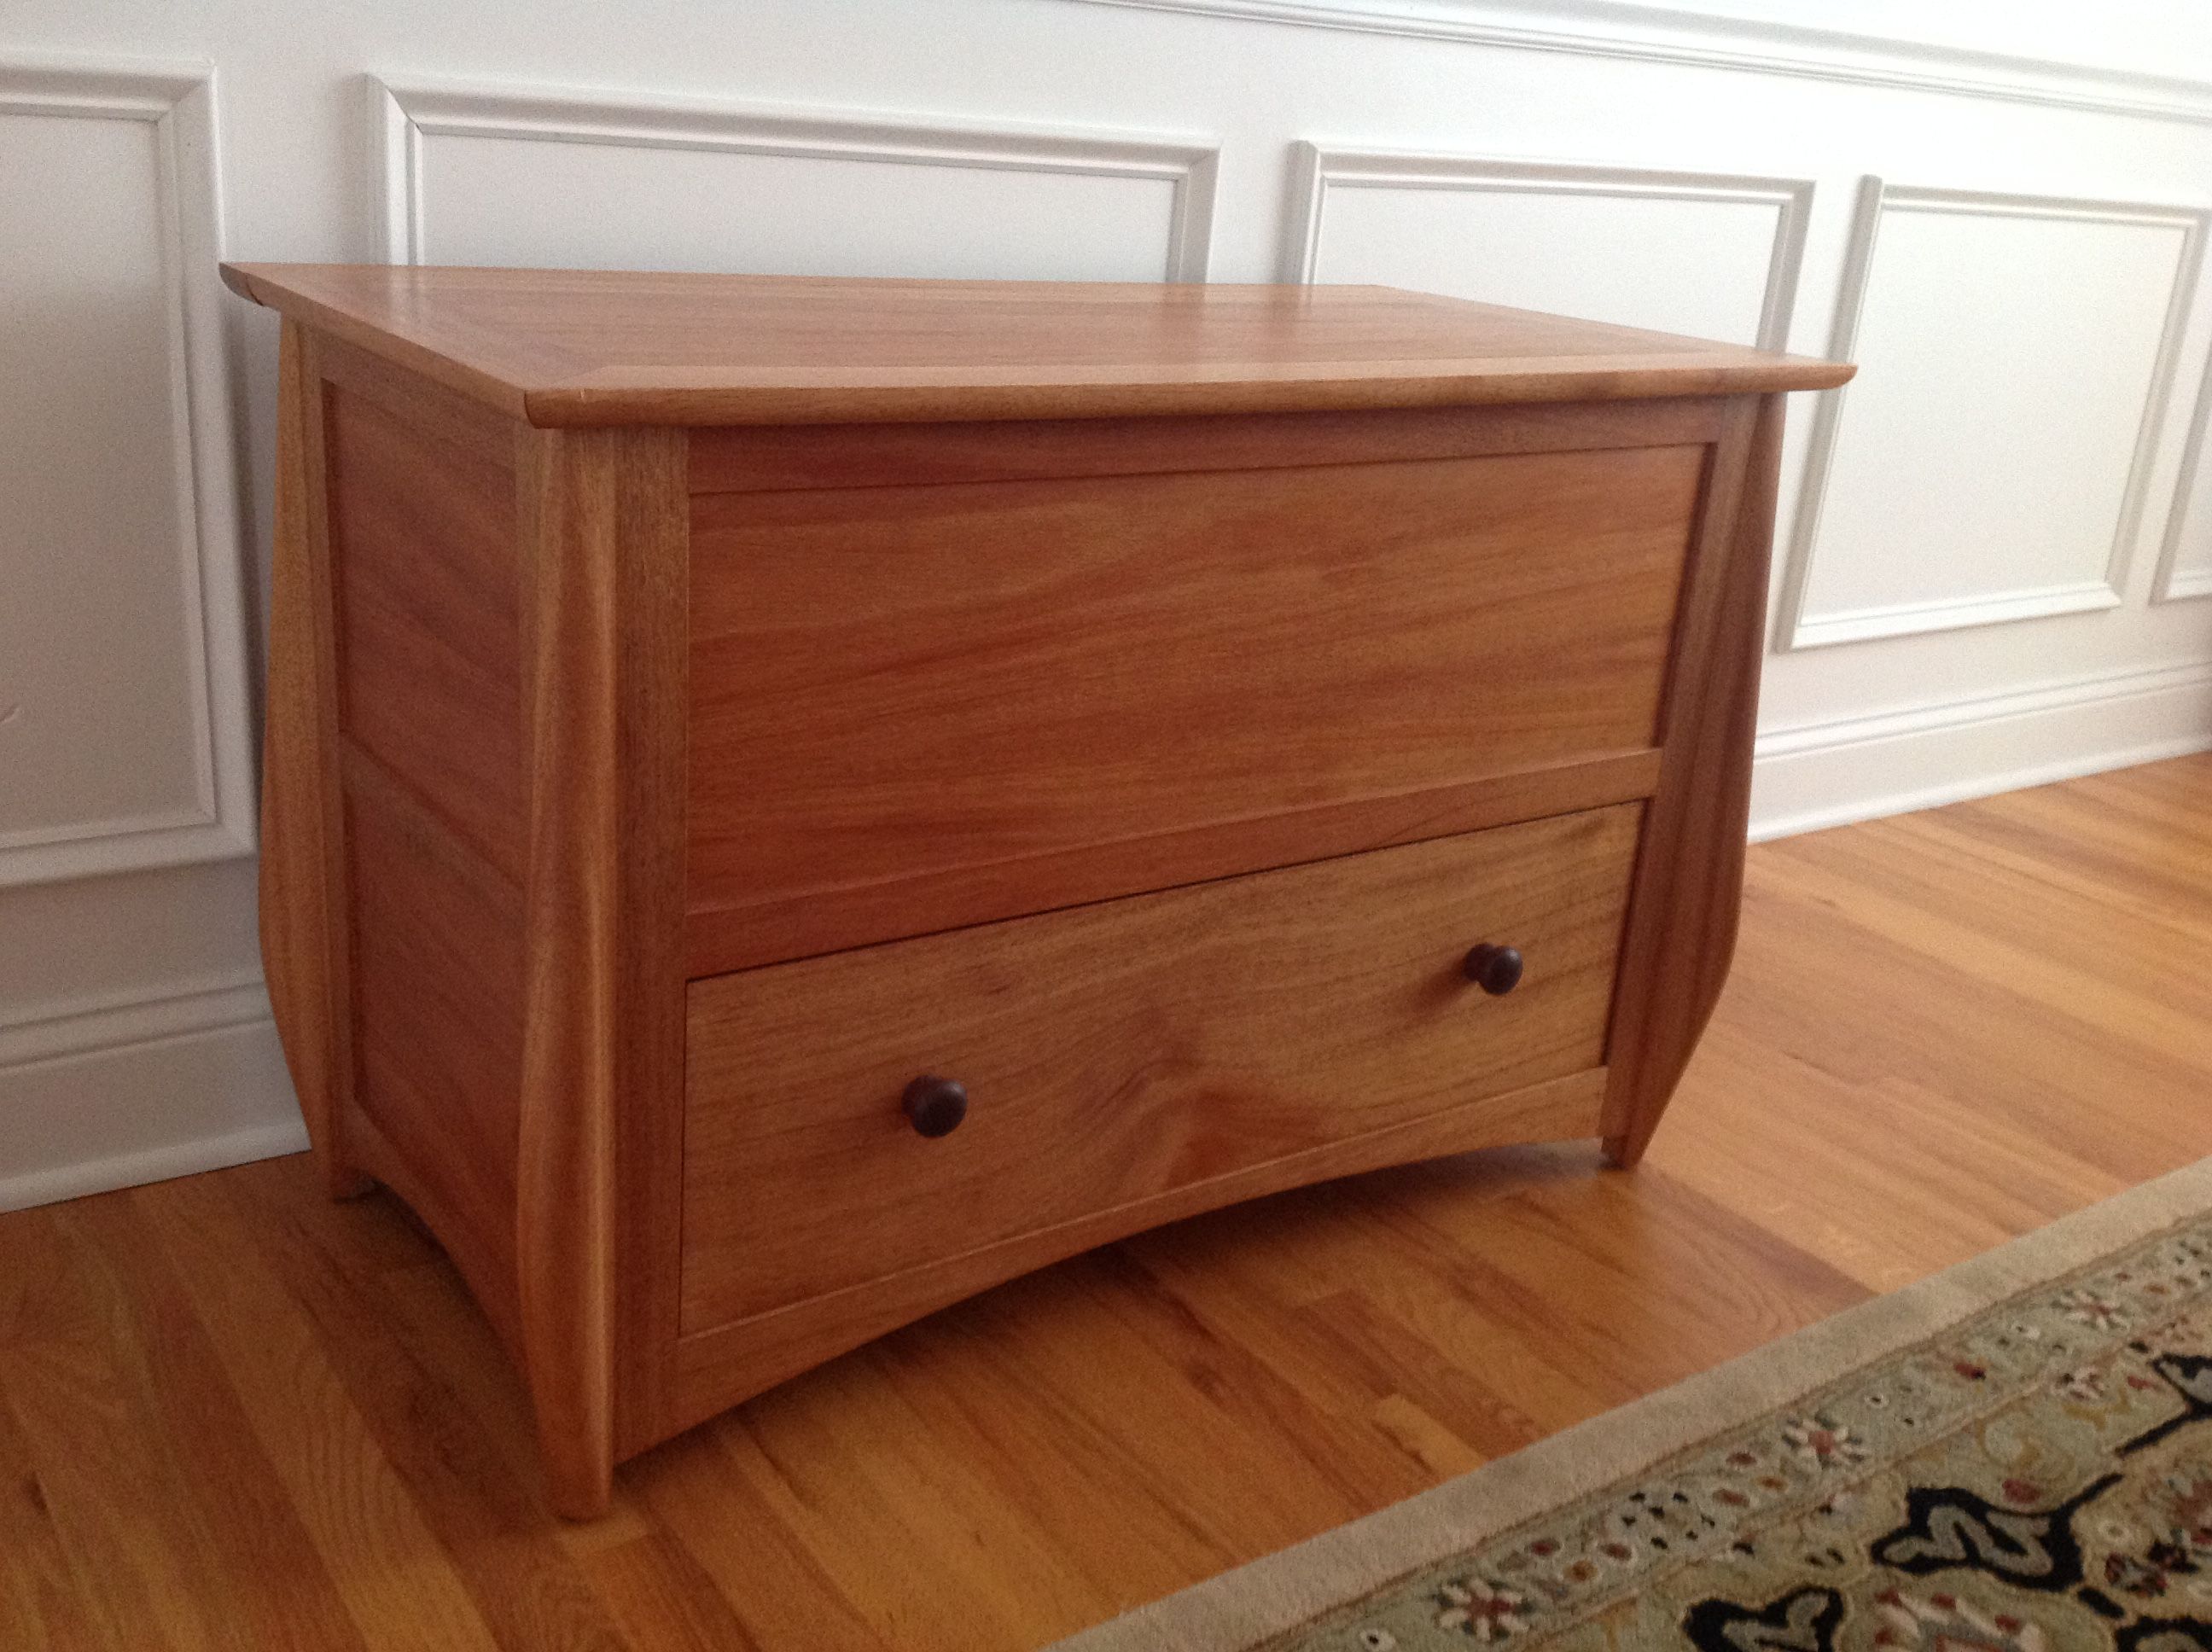 Buy A Handmade Blanket Chest Made To Order From Katherine Park